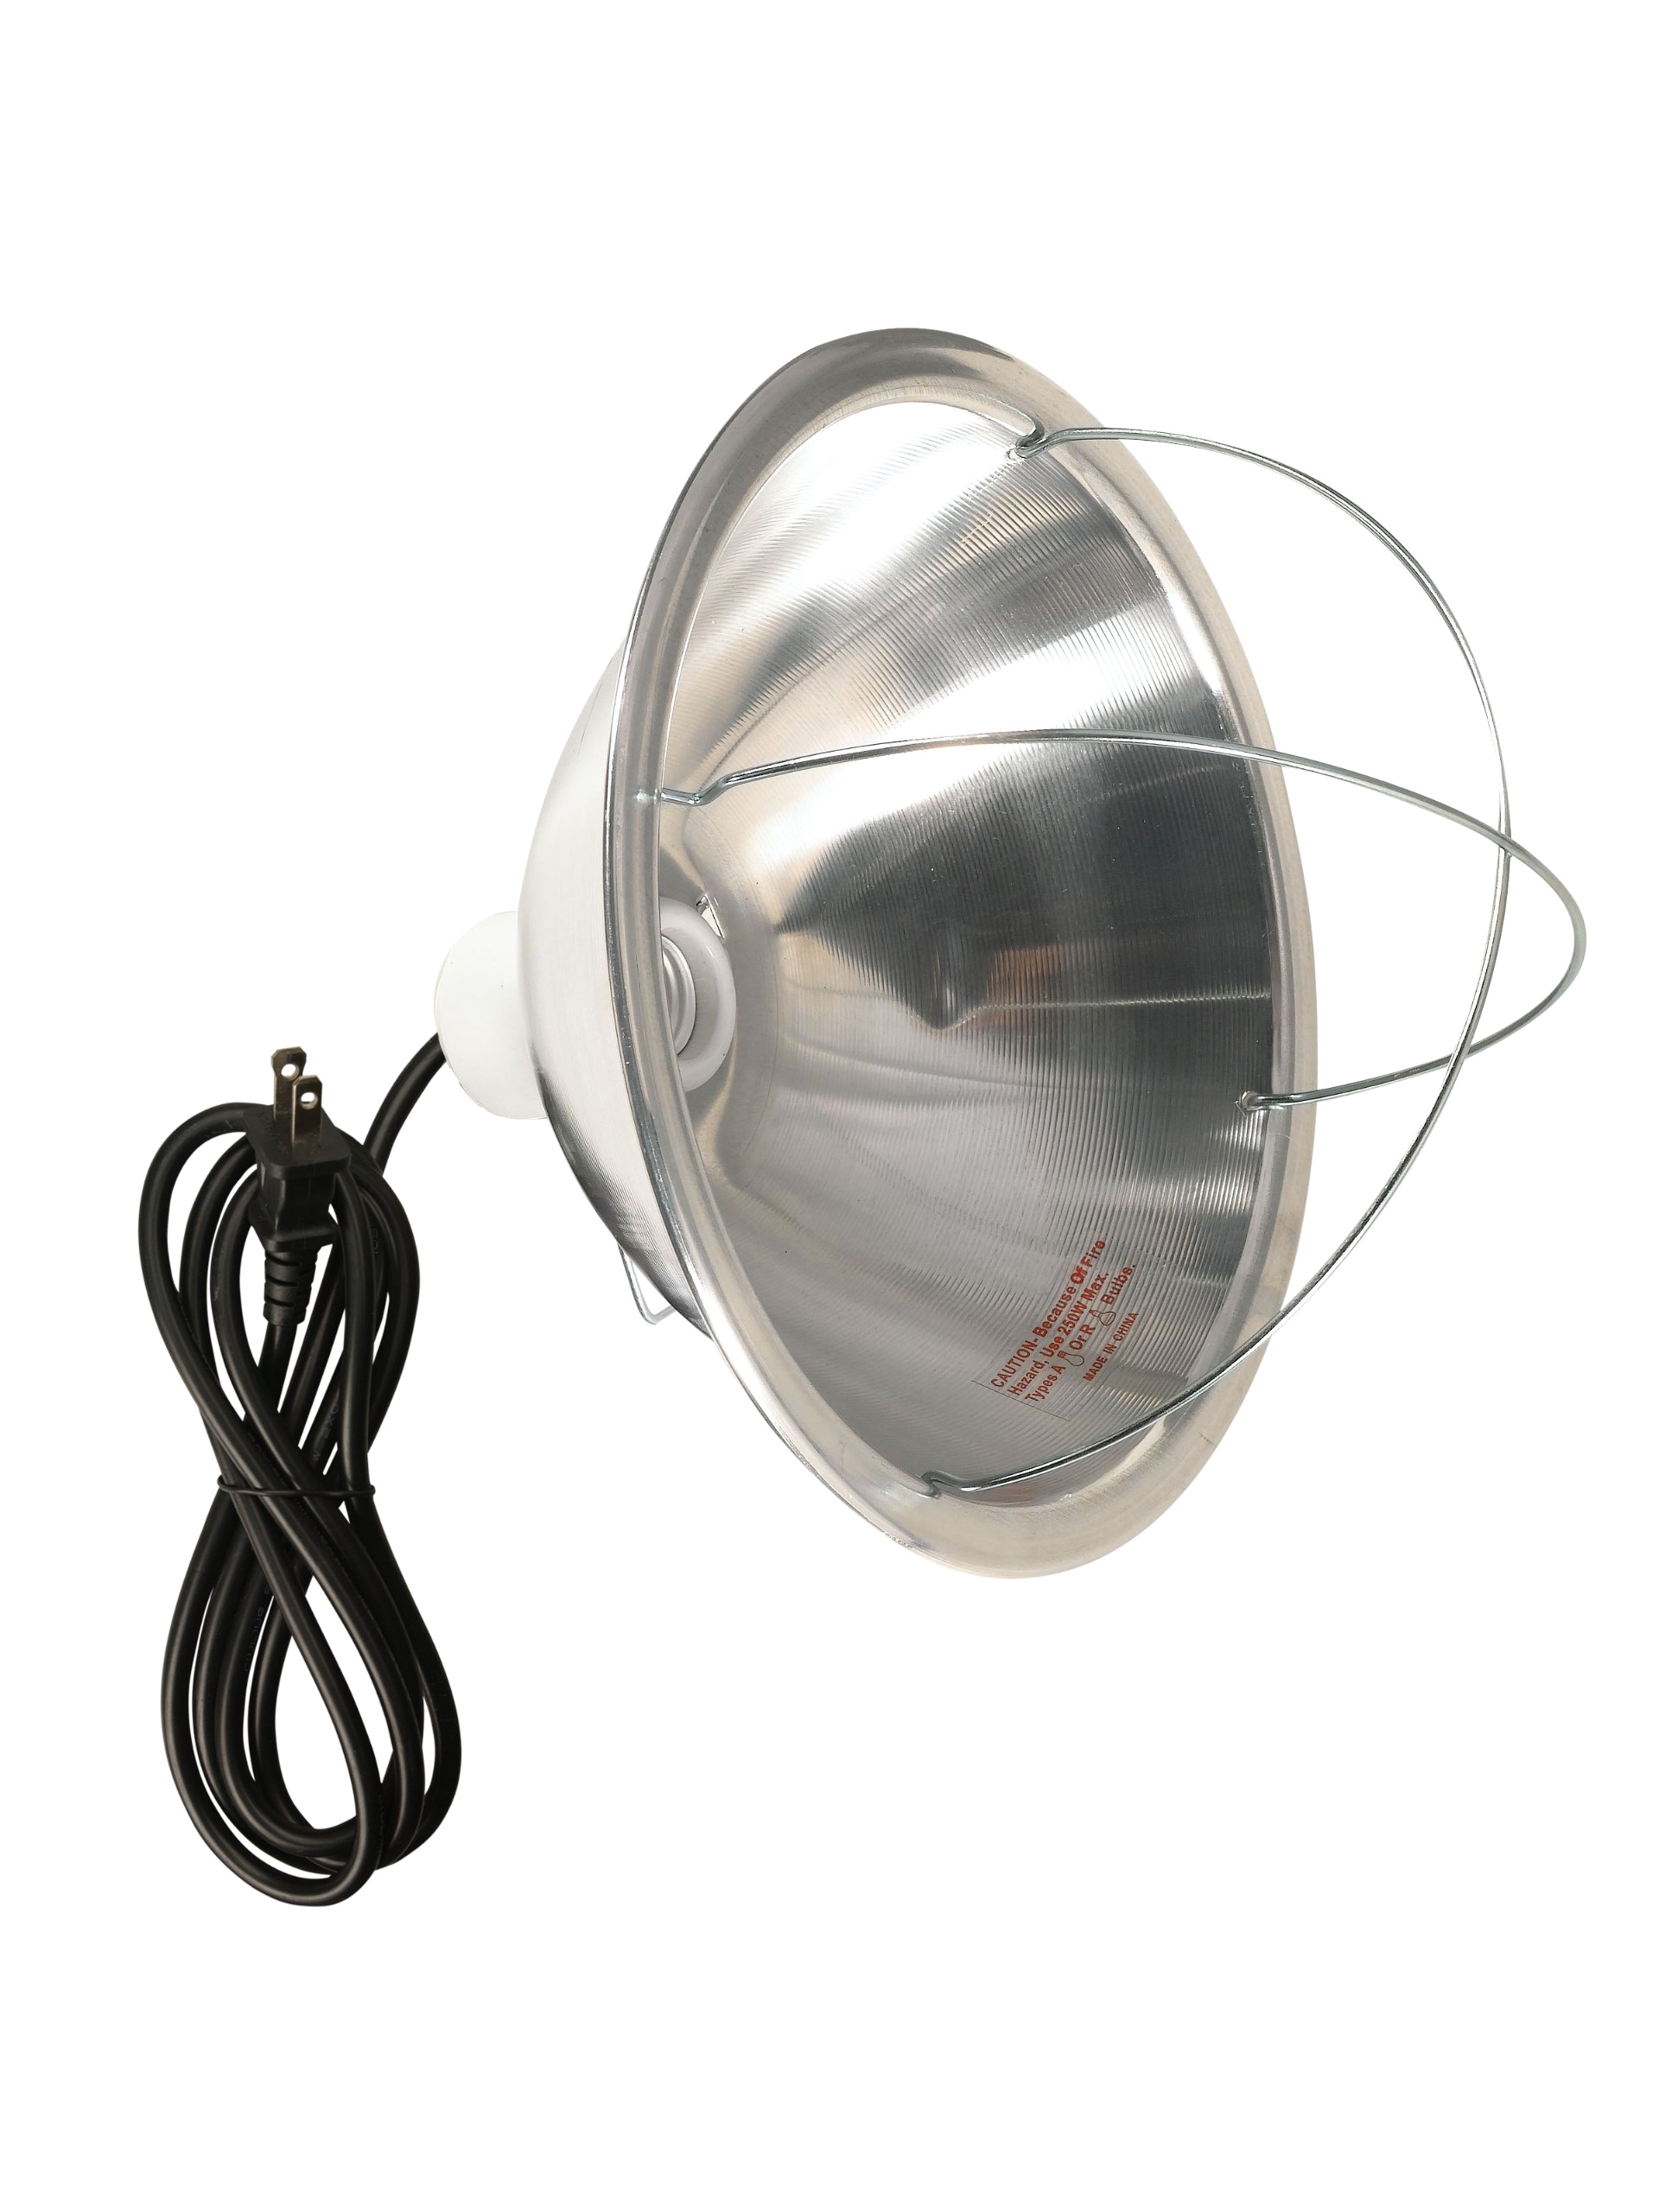 Tractor Supply Company Heat Lamp Woods 0165 Brooder Lamp with Bulb Guard 10 5 Inch Reflector and 6